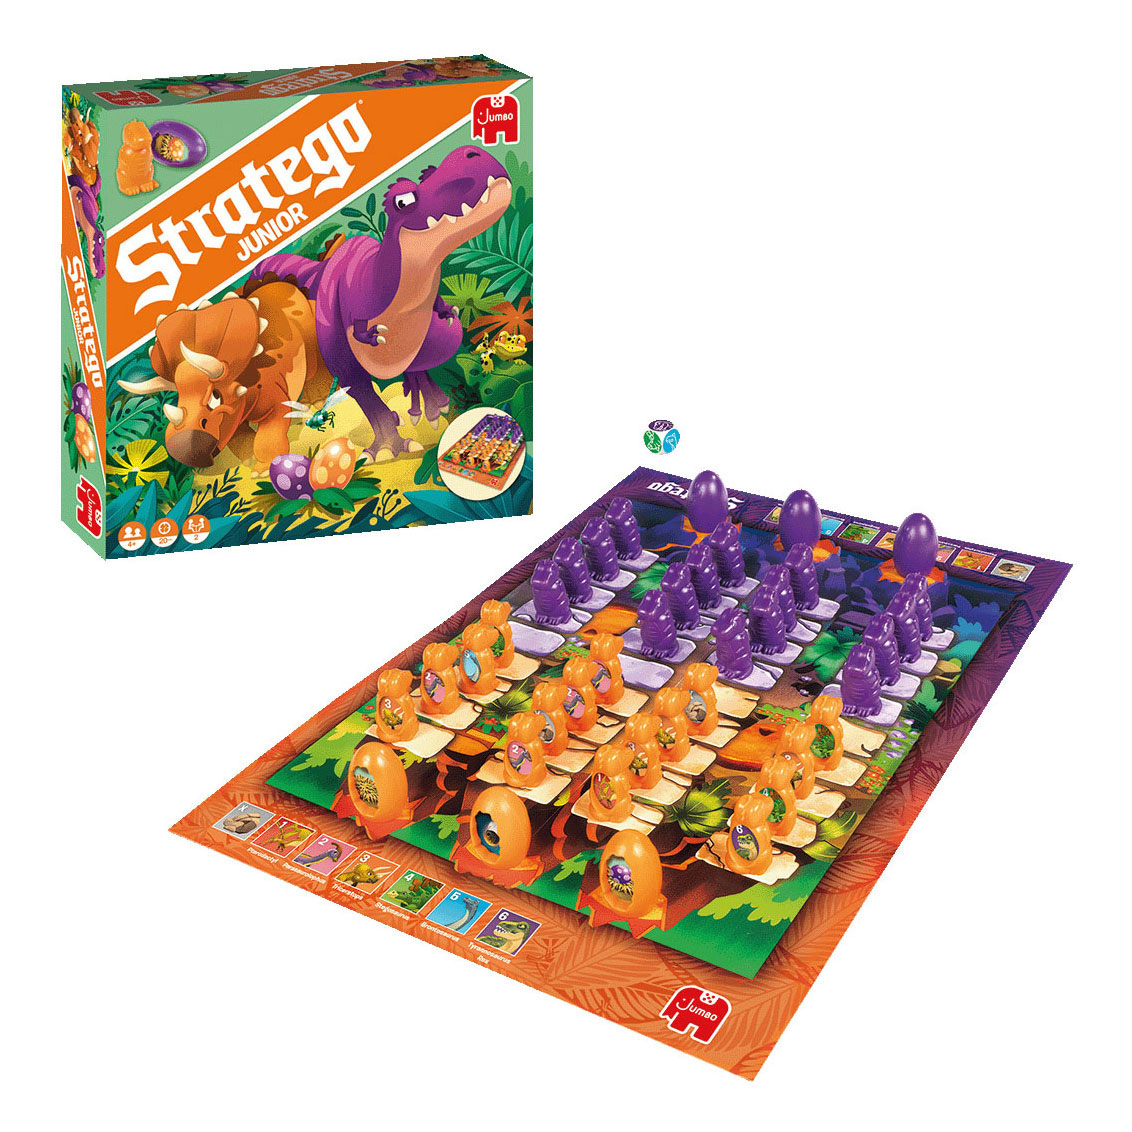  Stratego Board Game : Toys & Games